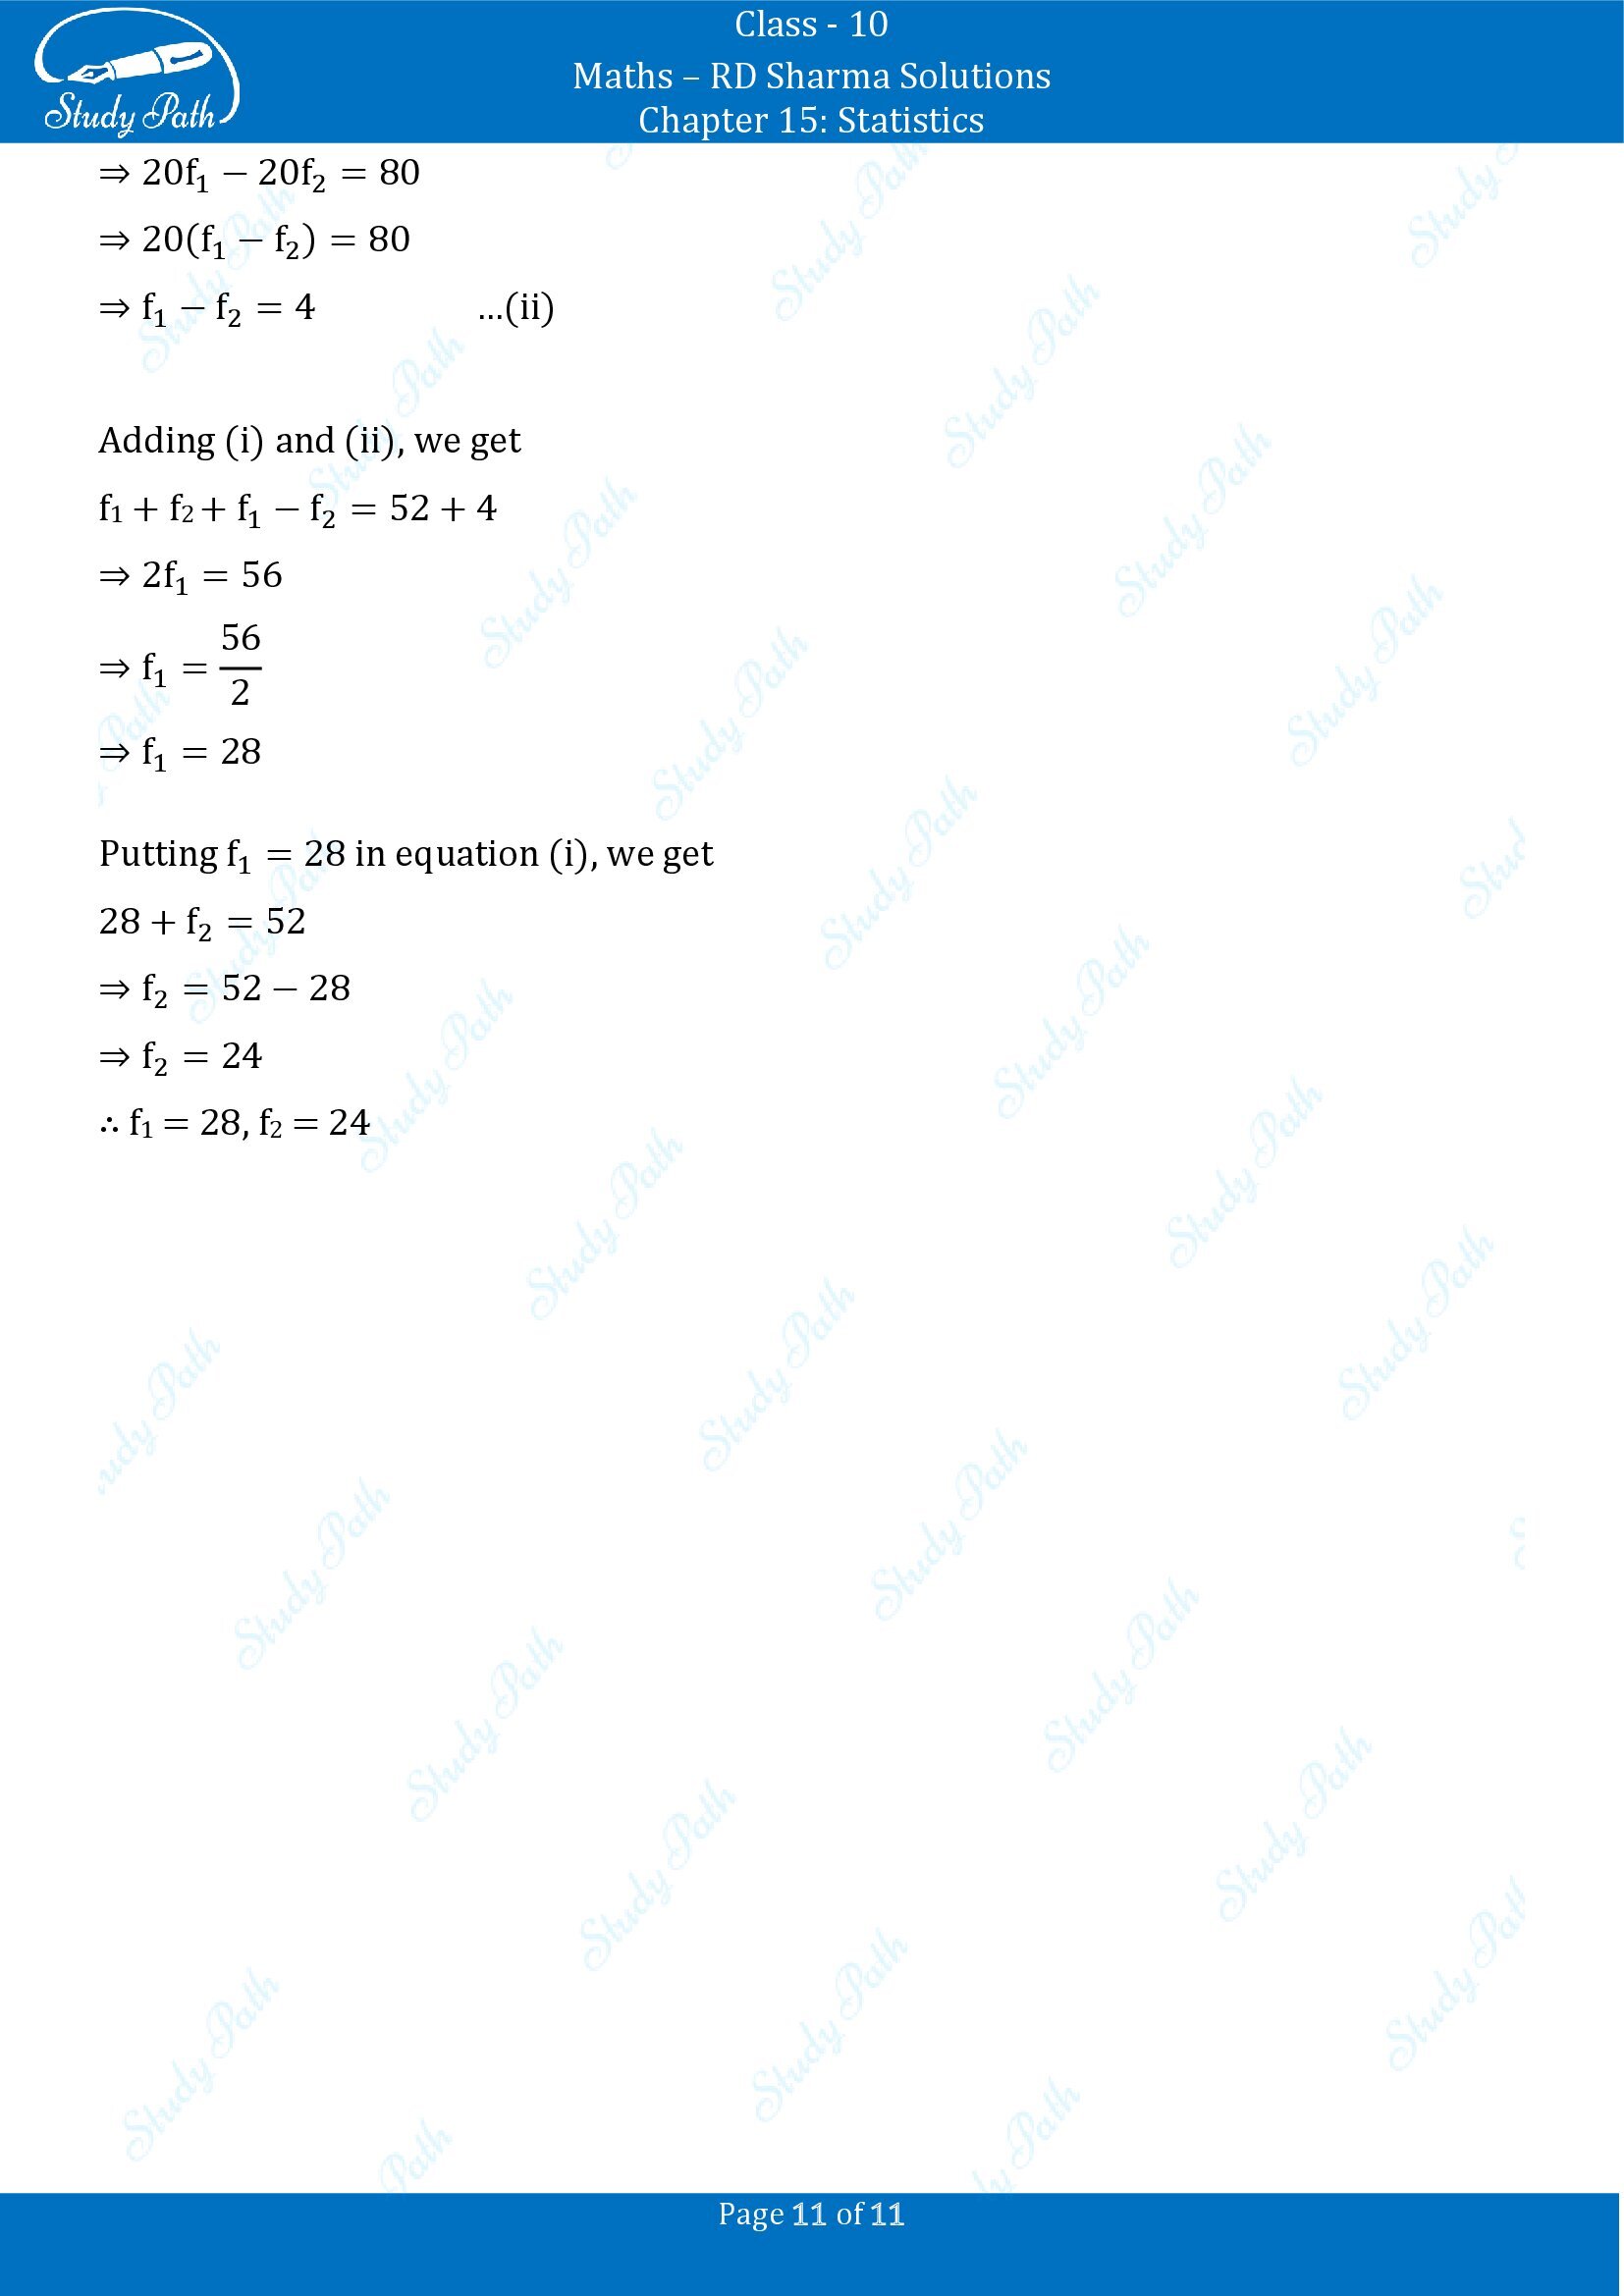 RD Sharma Solutions Class 10 Chapter 15 Statistics Exercise 15.1 00011